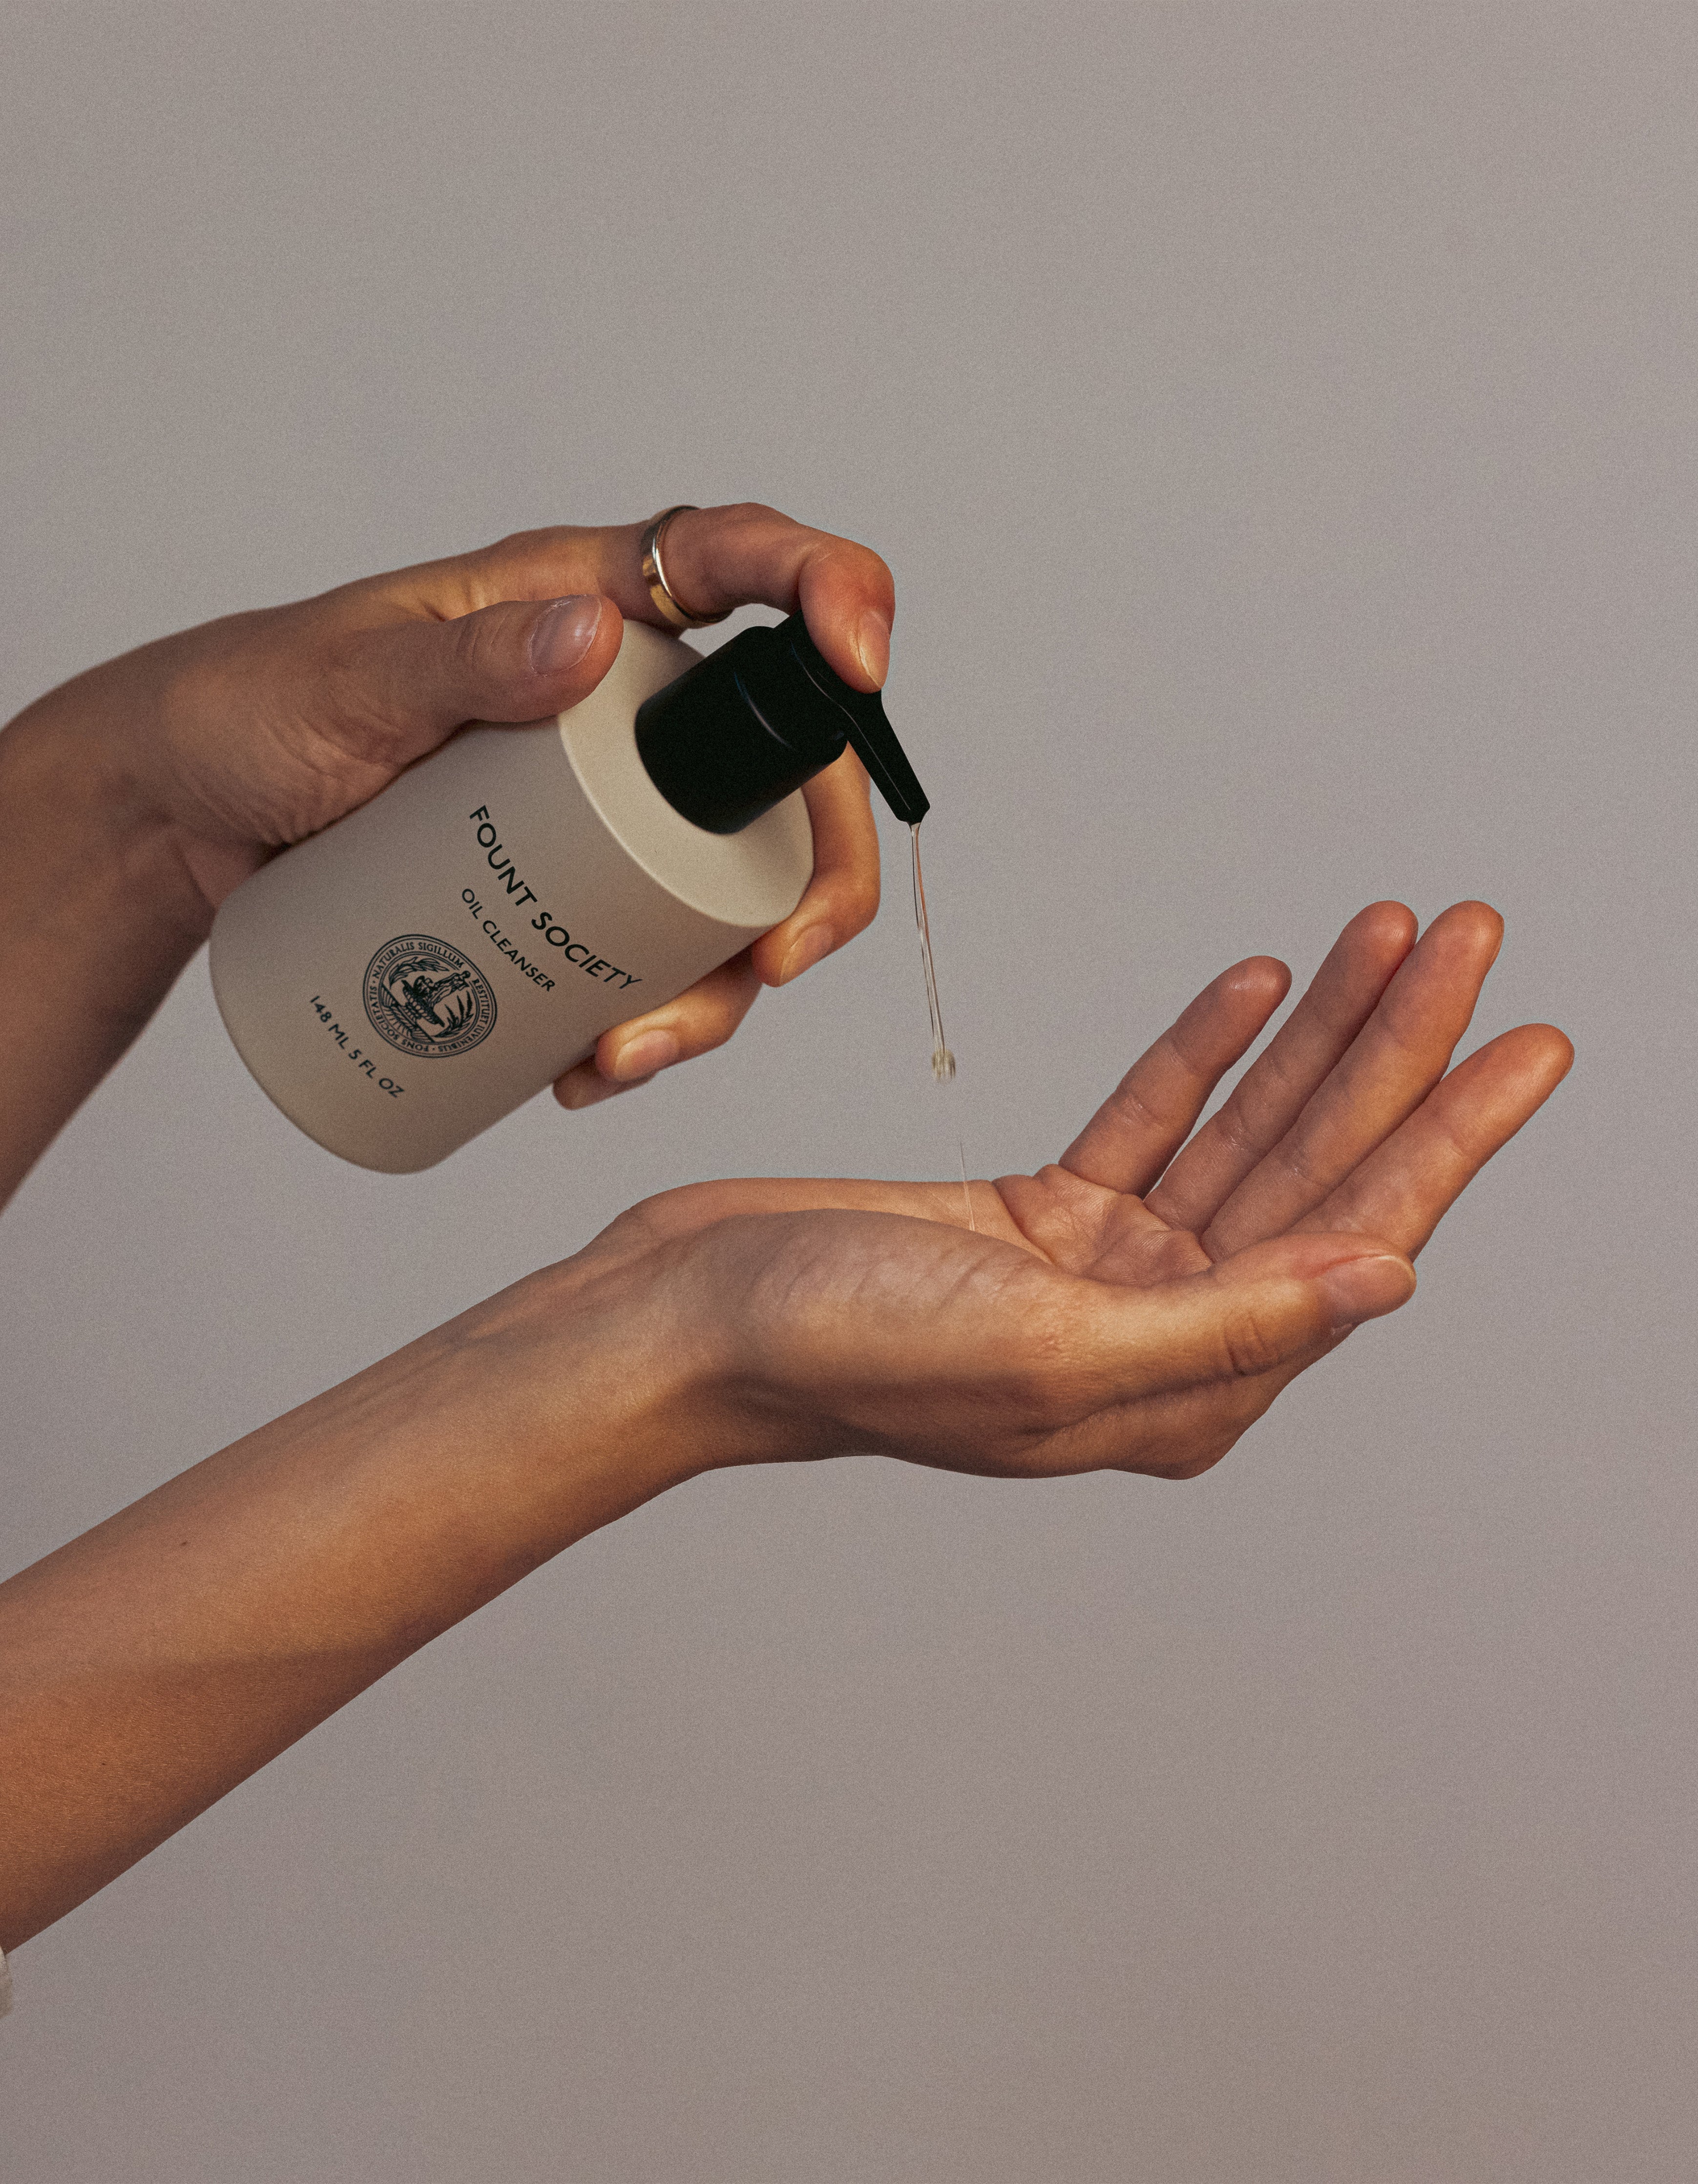 A person is holding a white bottle with a black pump labeled "Cozy Earth Oil Cleanser" and dispensing a drop of liquid onto their other palm, set against a neutral background. The bottle features a round logo, and the hands are positioned gracefully.